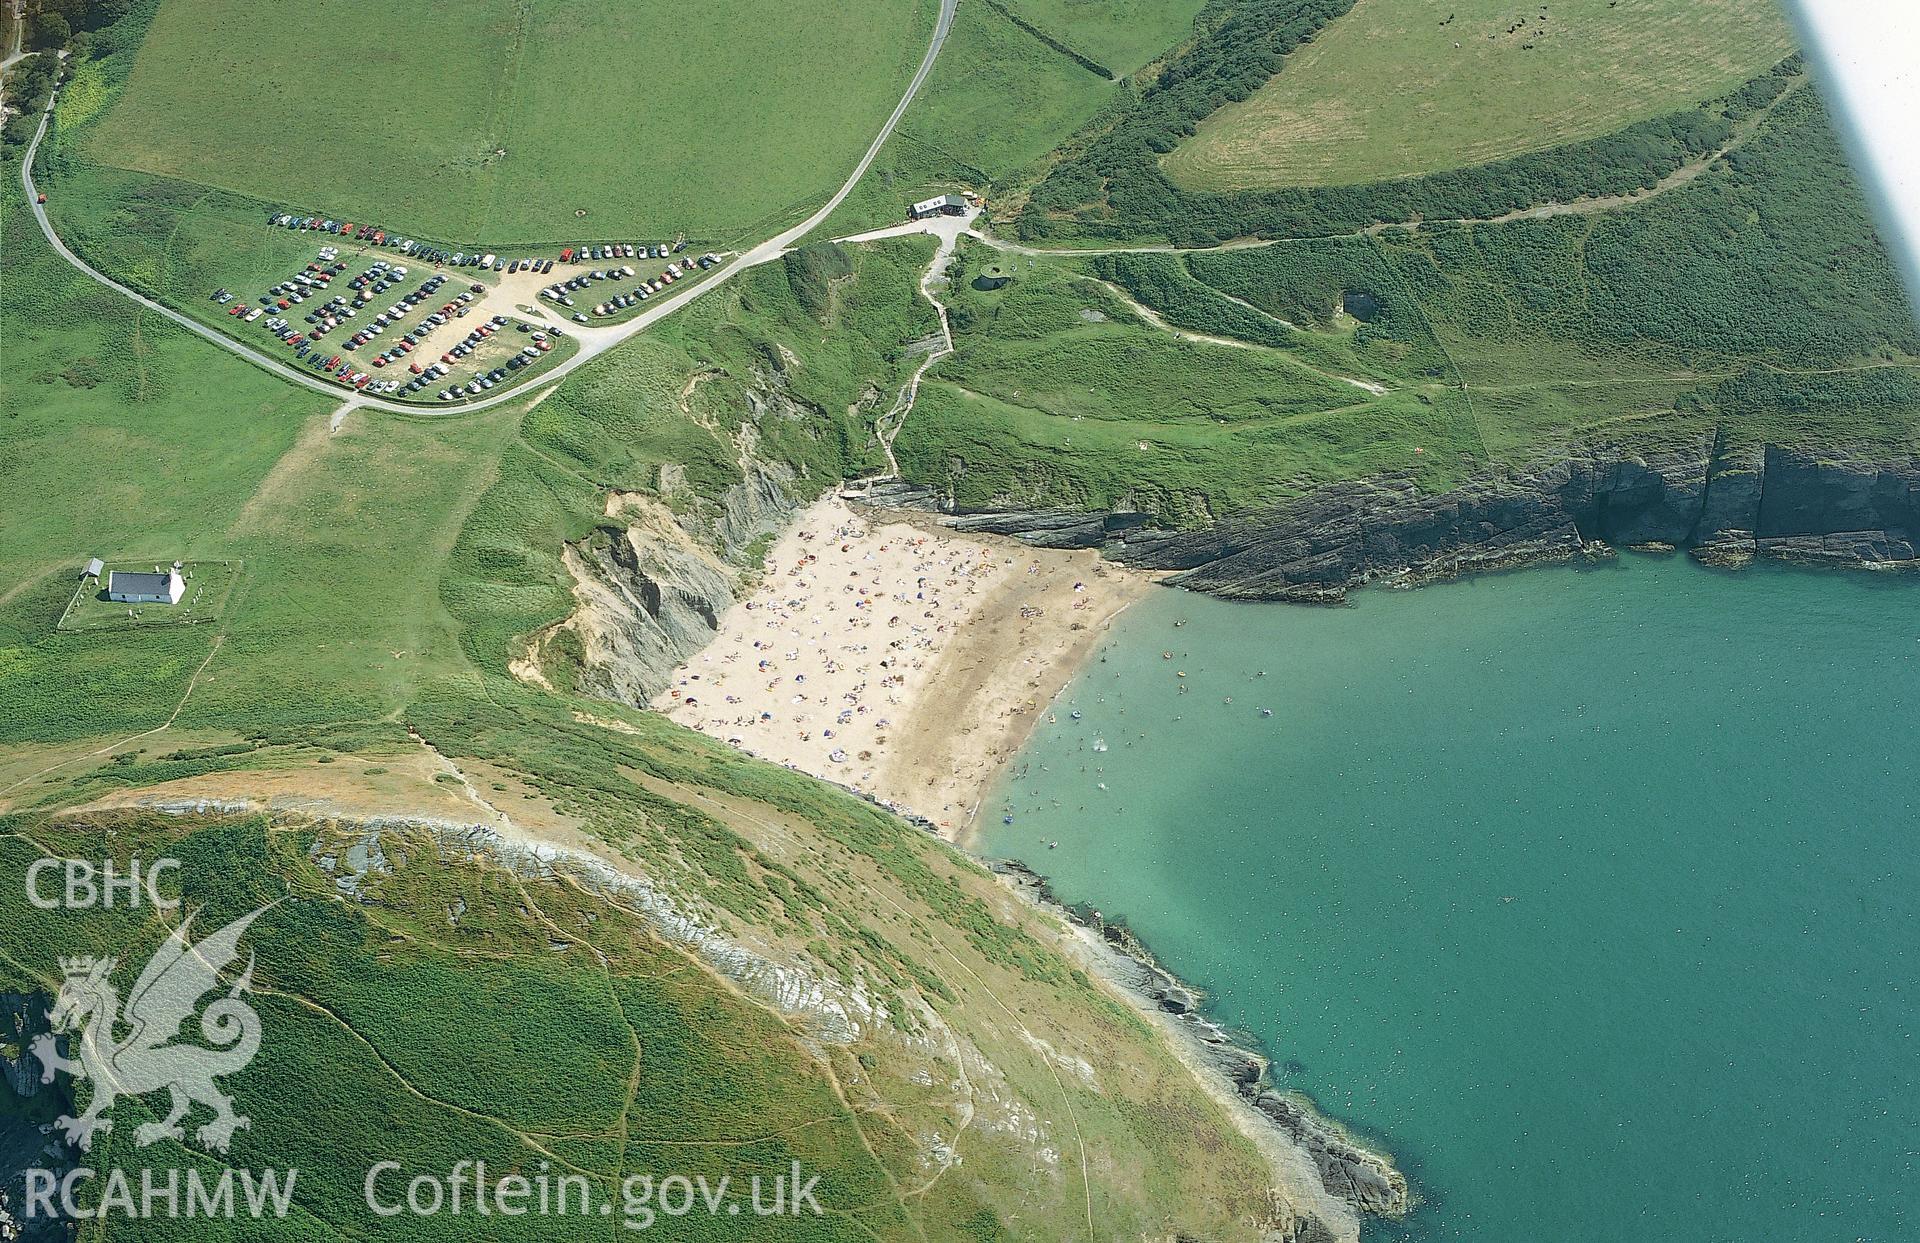 RCAHMW colour oblique aerial photograph of Holy Cross Church, Mwnt Verwig taken on 05/08/2002 by Toby Driver